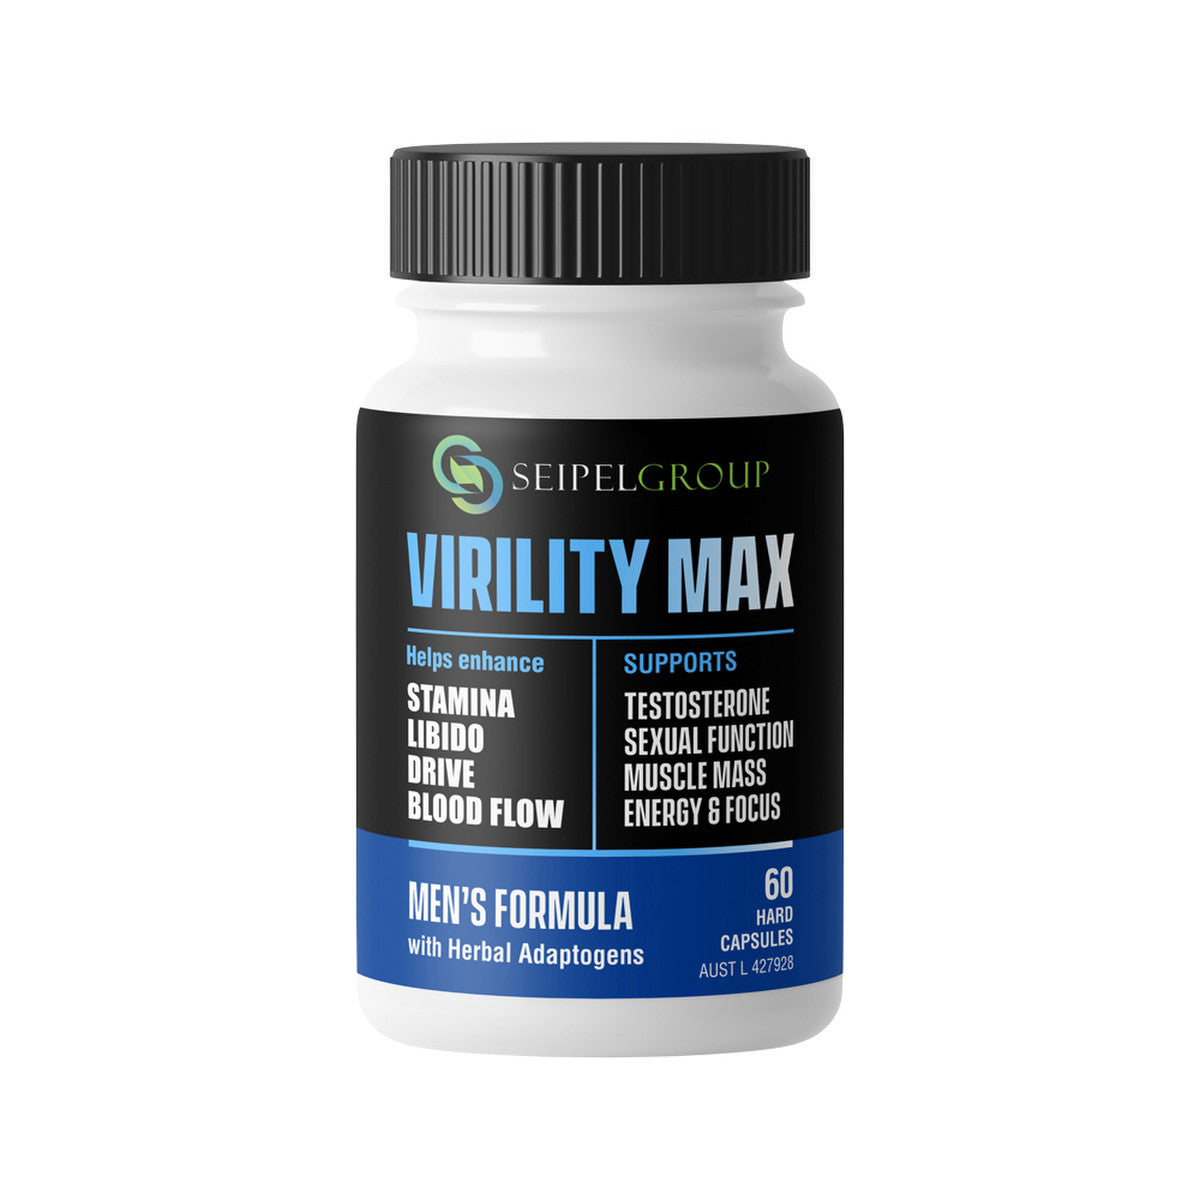 Virility Max by Seipelgroup Men's Formula with Herbal Adaptogens 60 Capsules